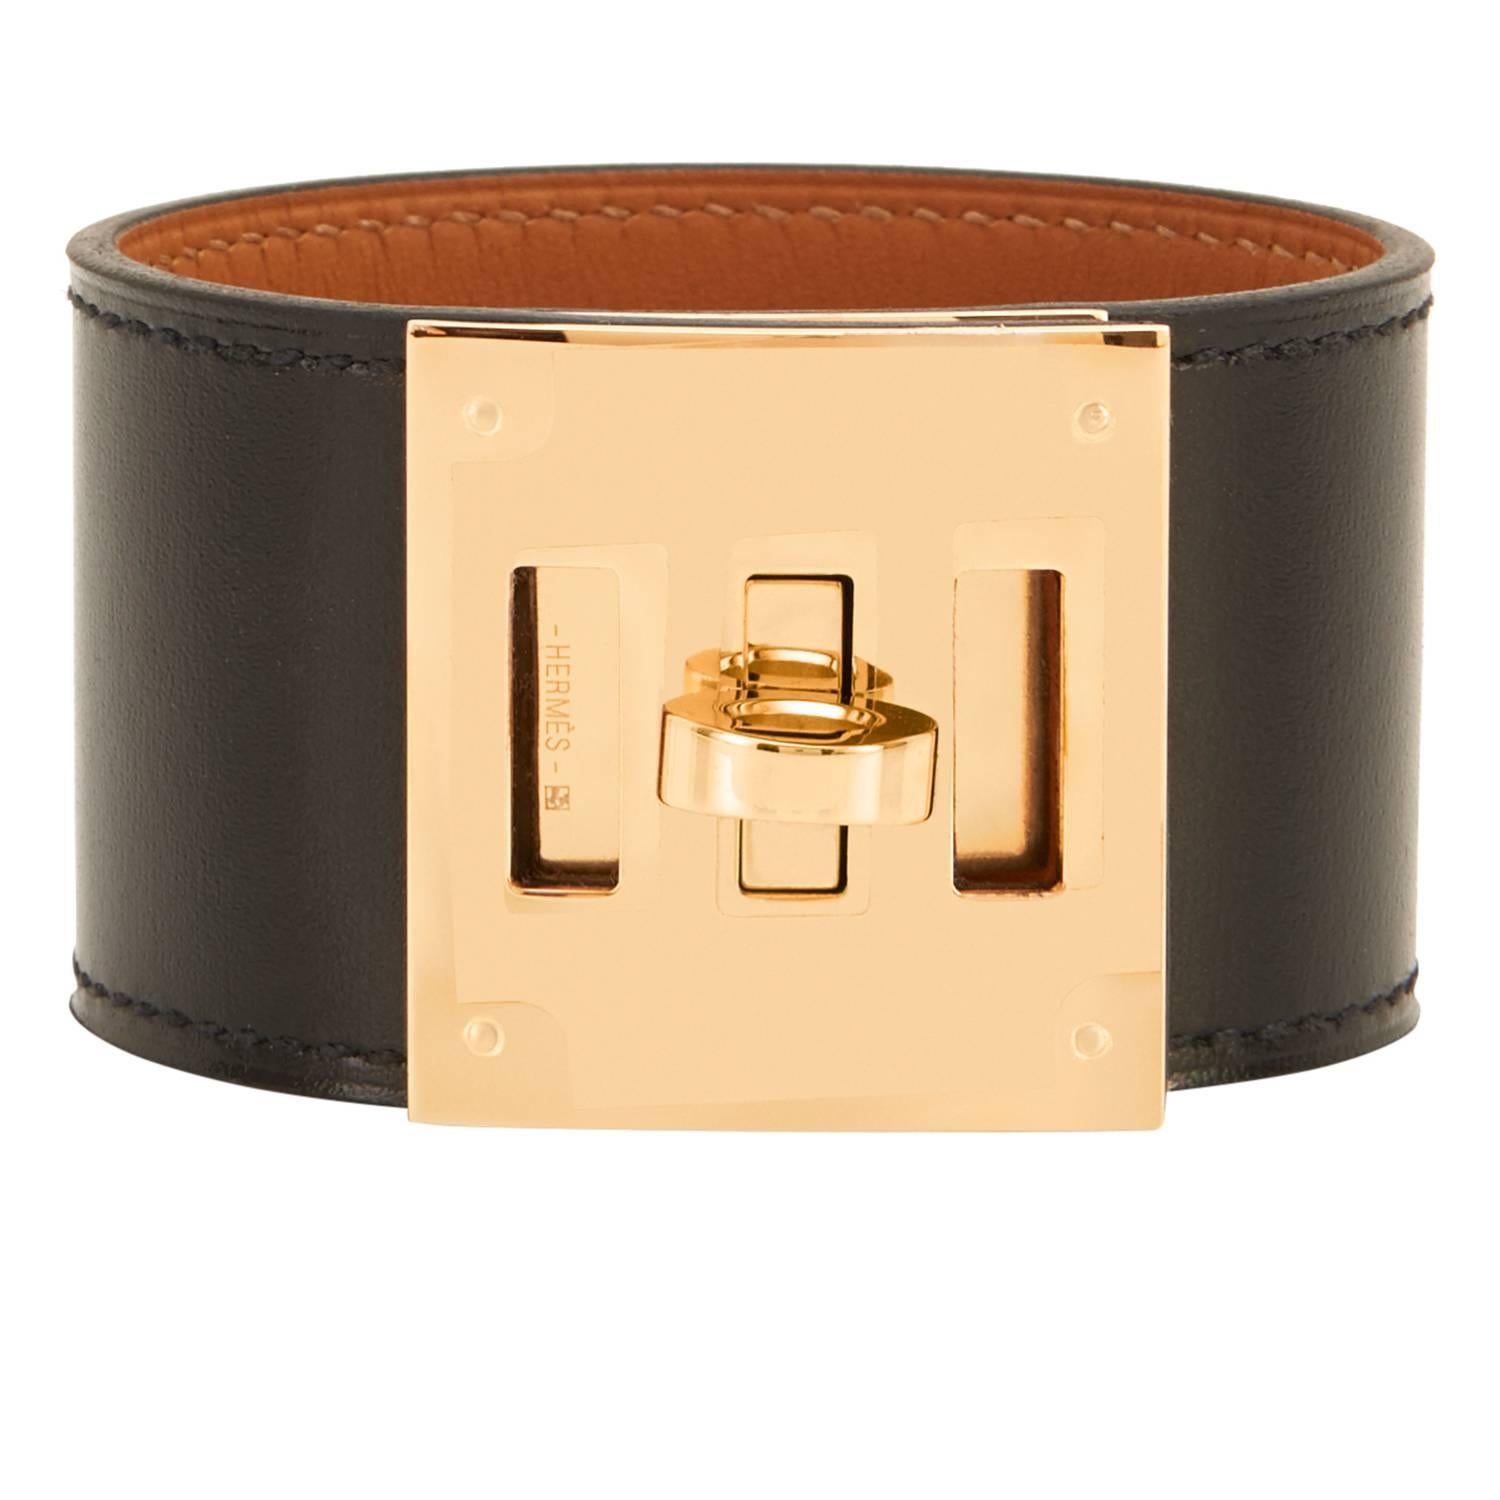 Hermes Black Box Leather Kelly Dog Cuff Bracelet with Gold Hardware Chic 1